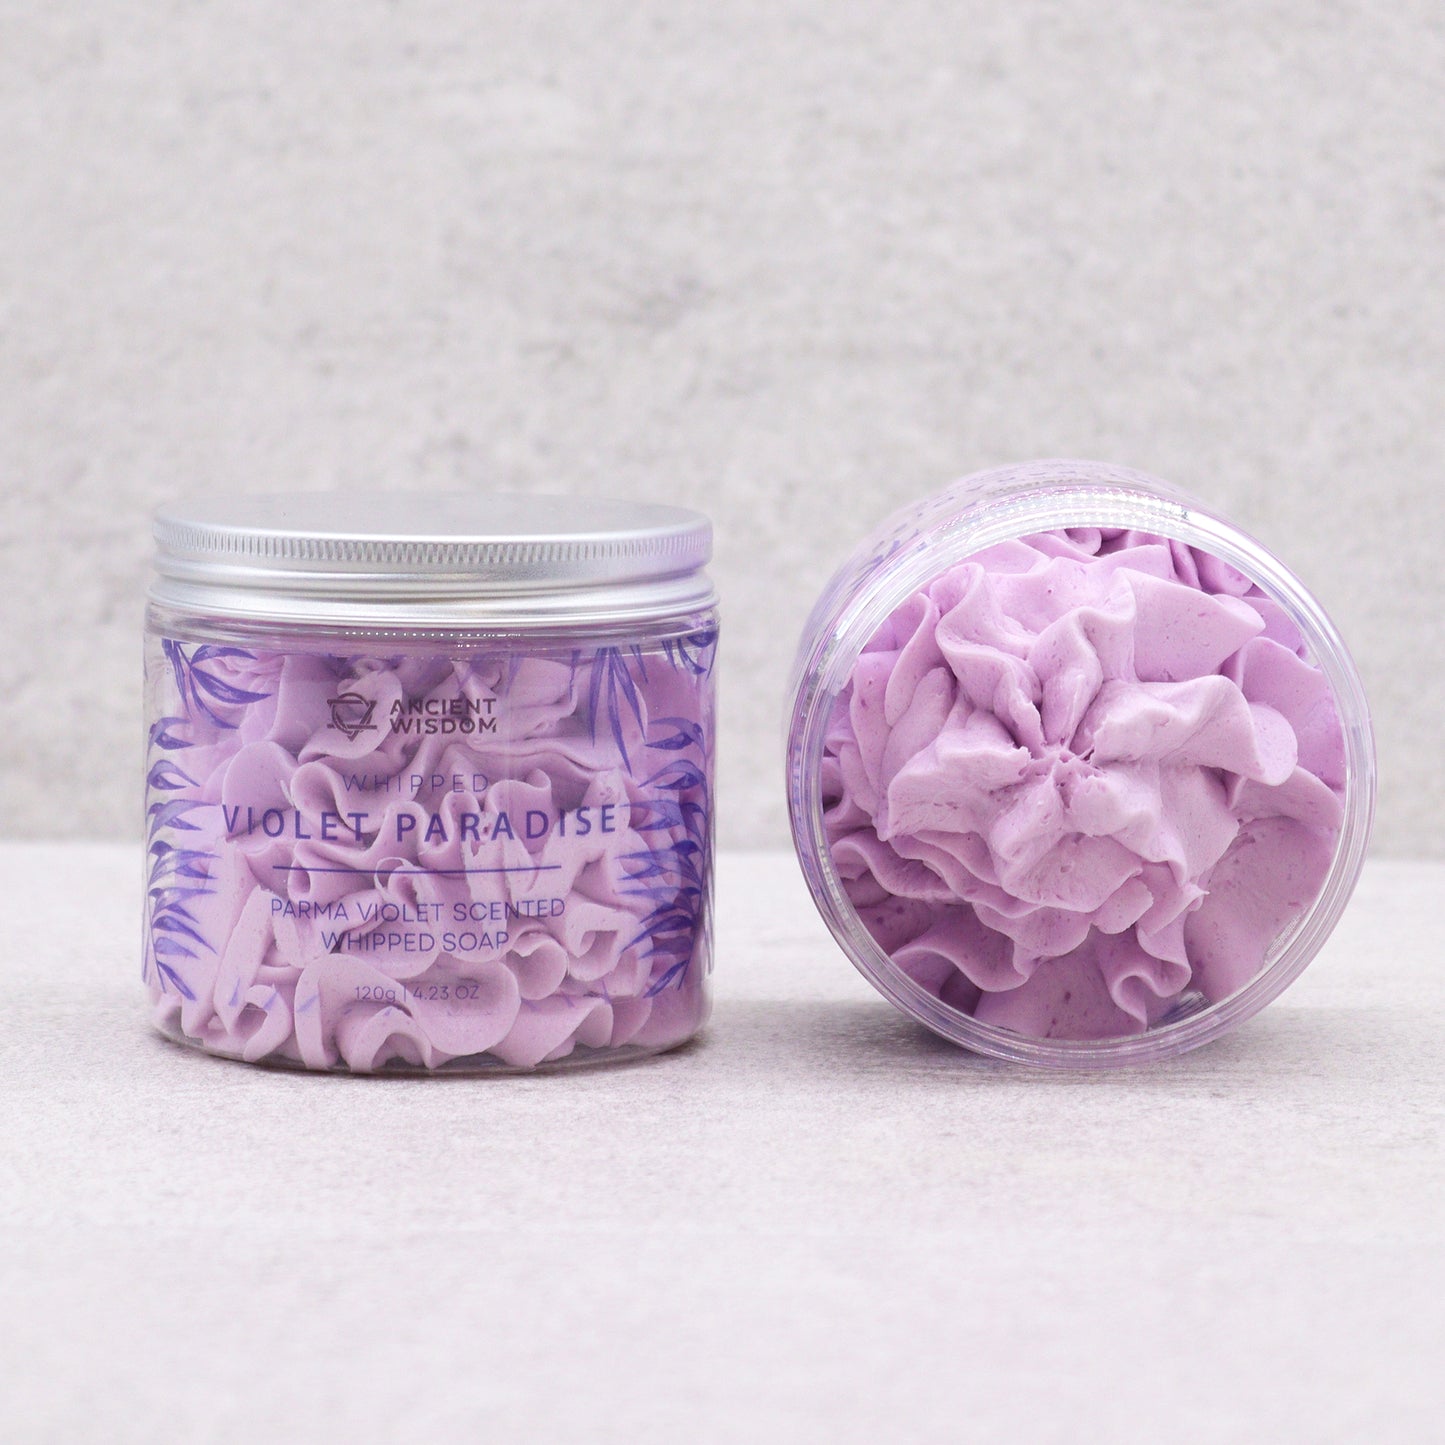 Parma Violet Whipped Cream Soap 120g - ScentiMelti Wax Melts